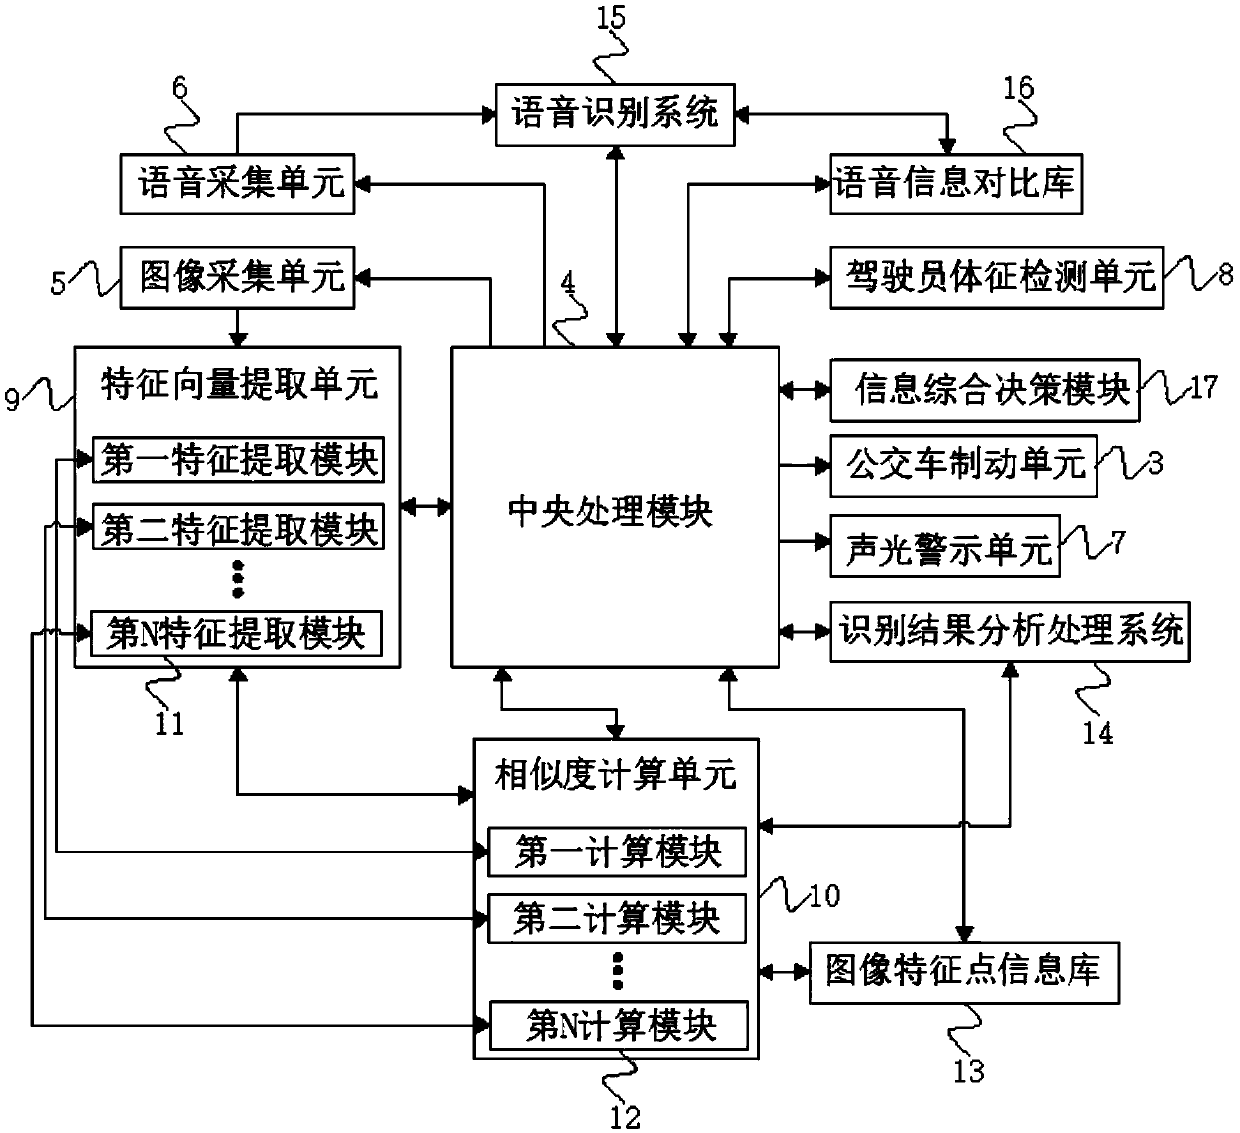 Bus driving protection system based on image recognition and voice transmission control